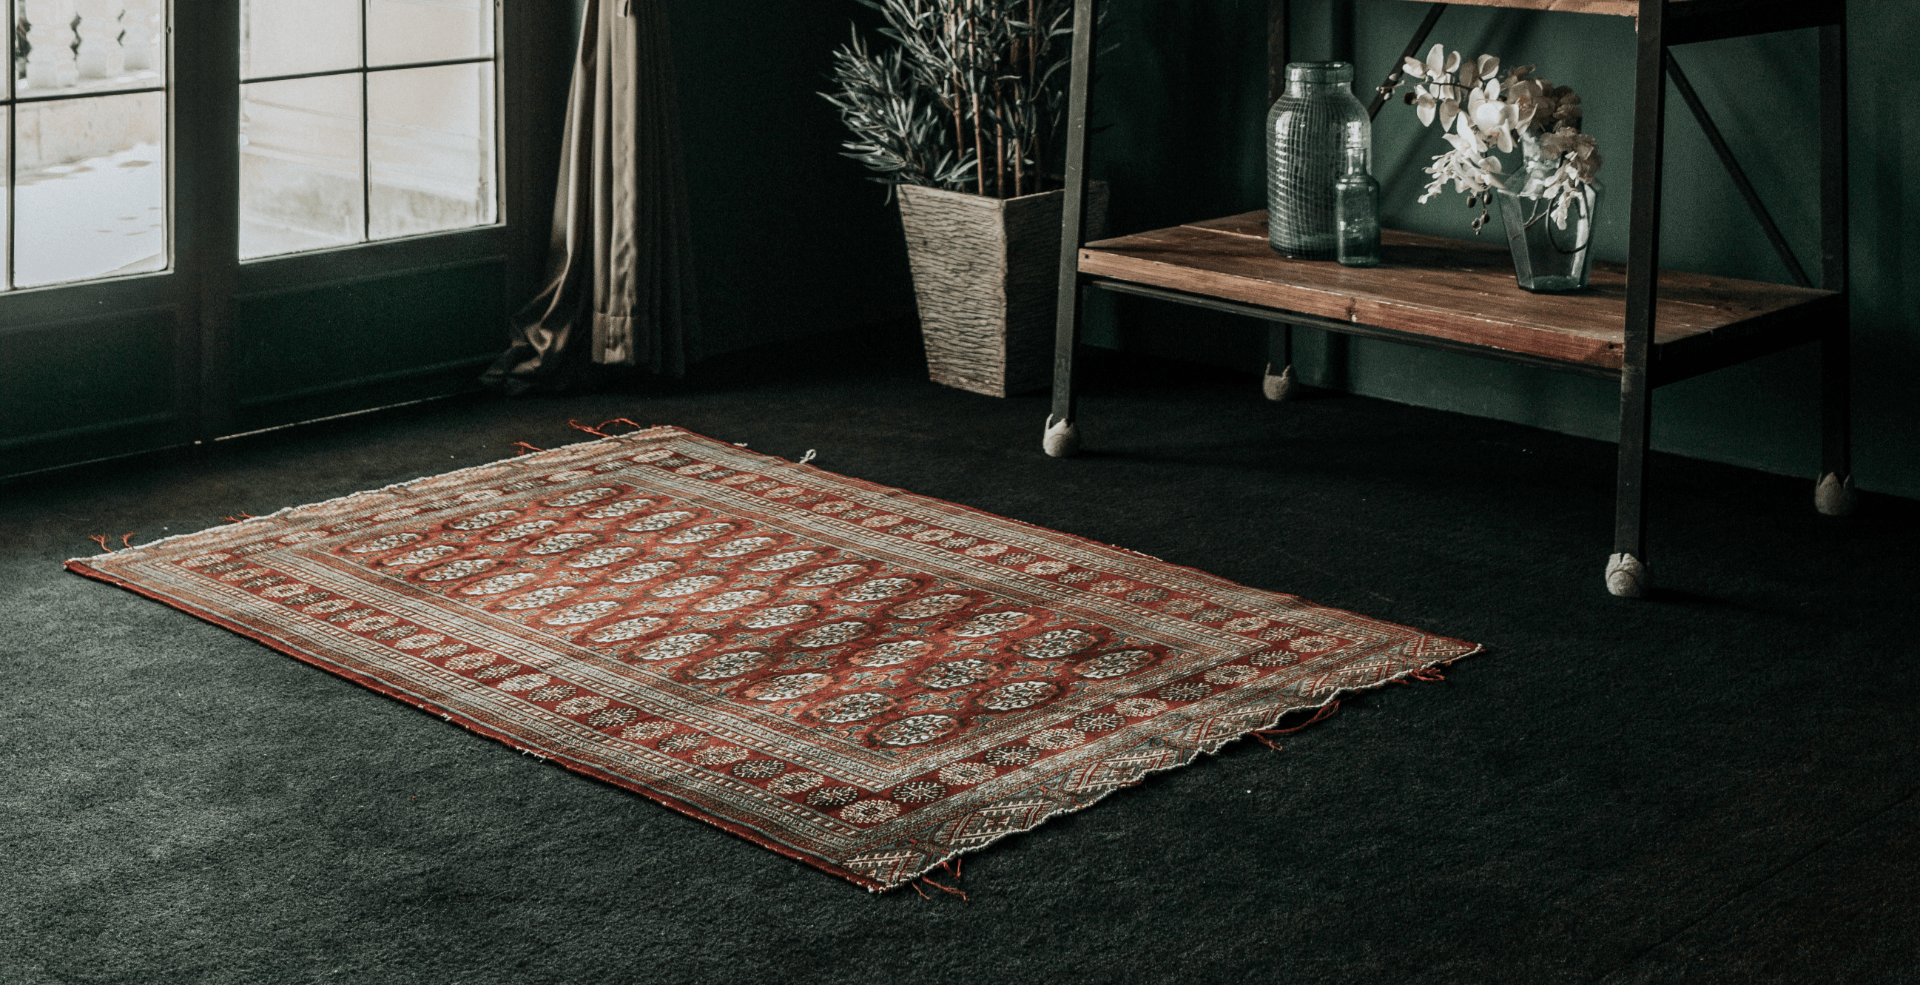 Gallery of traditional and hand woven carpets